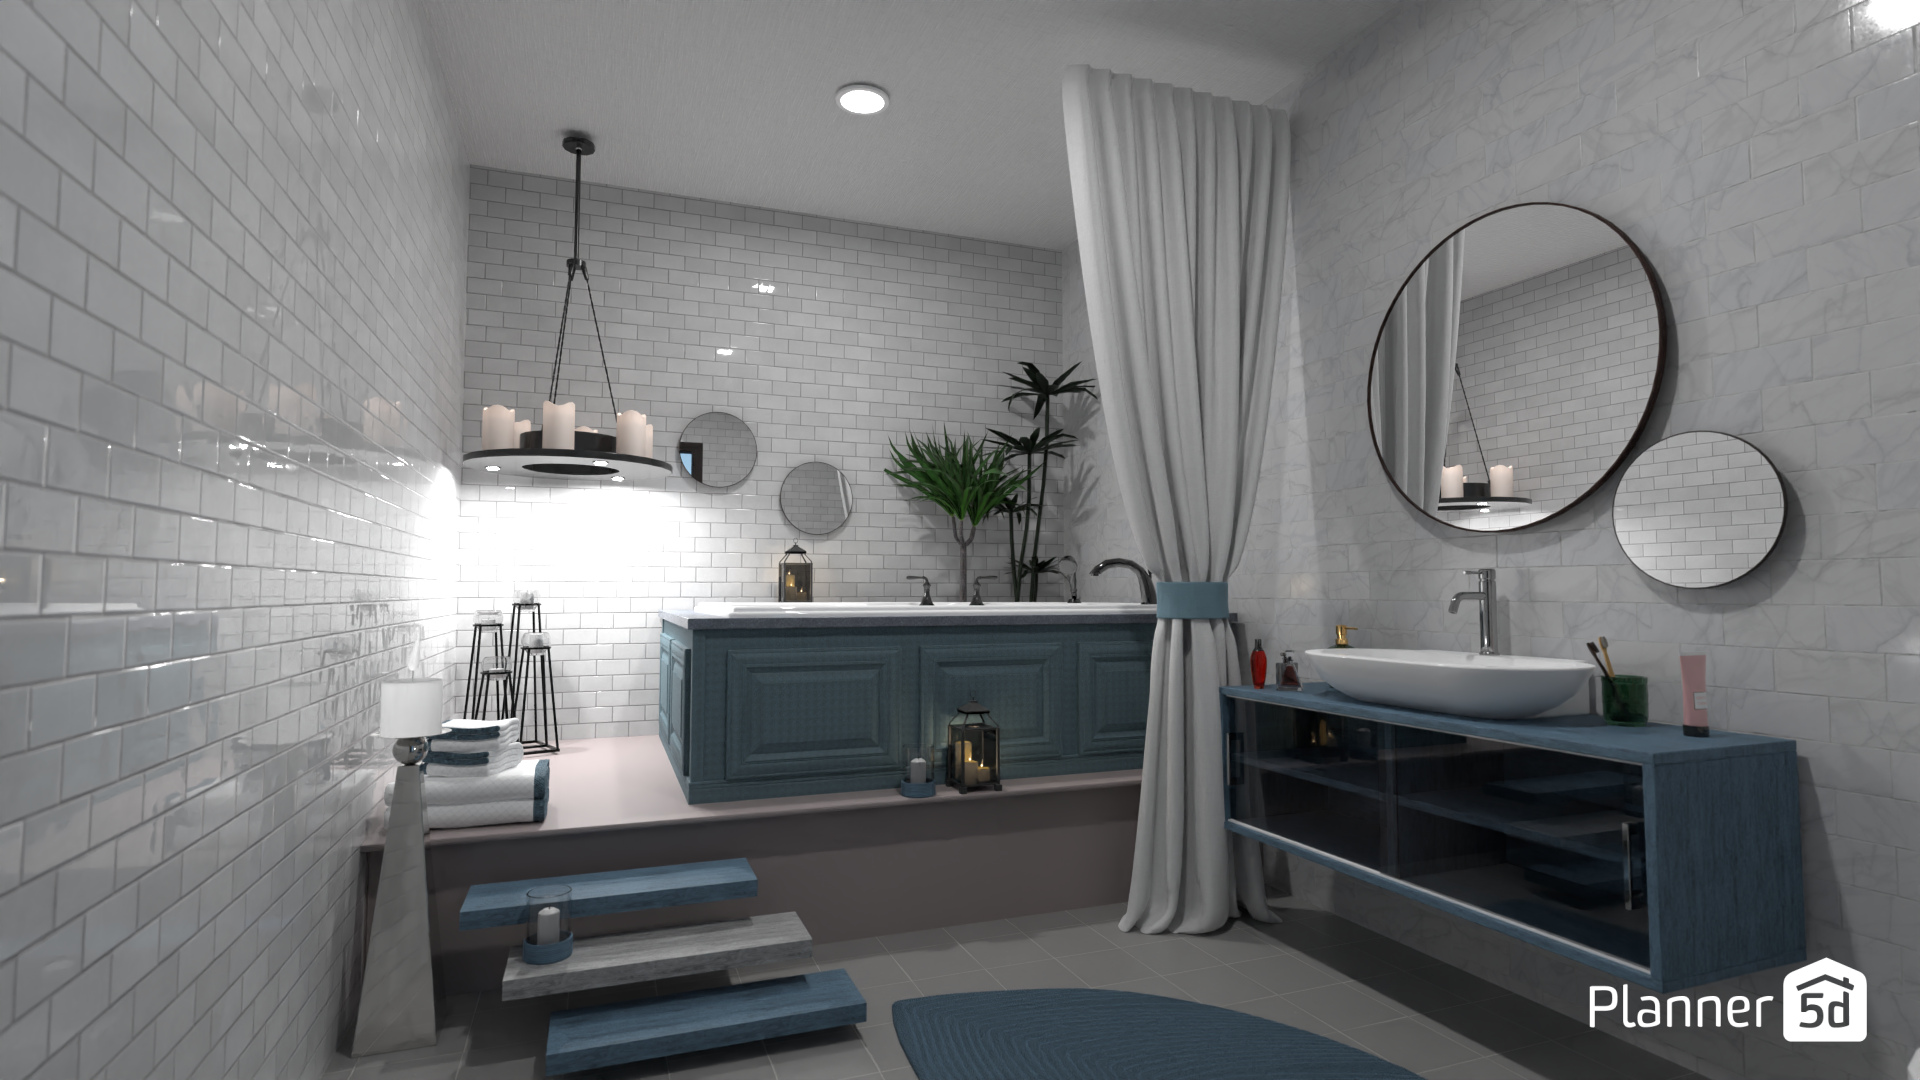 Bath in a candle light : design battle contest 19263632 by Gabes image